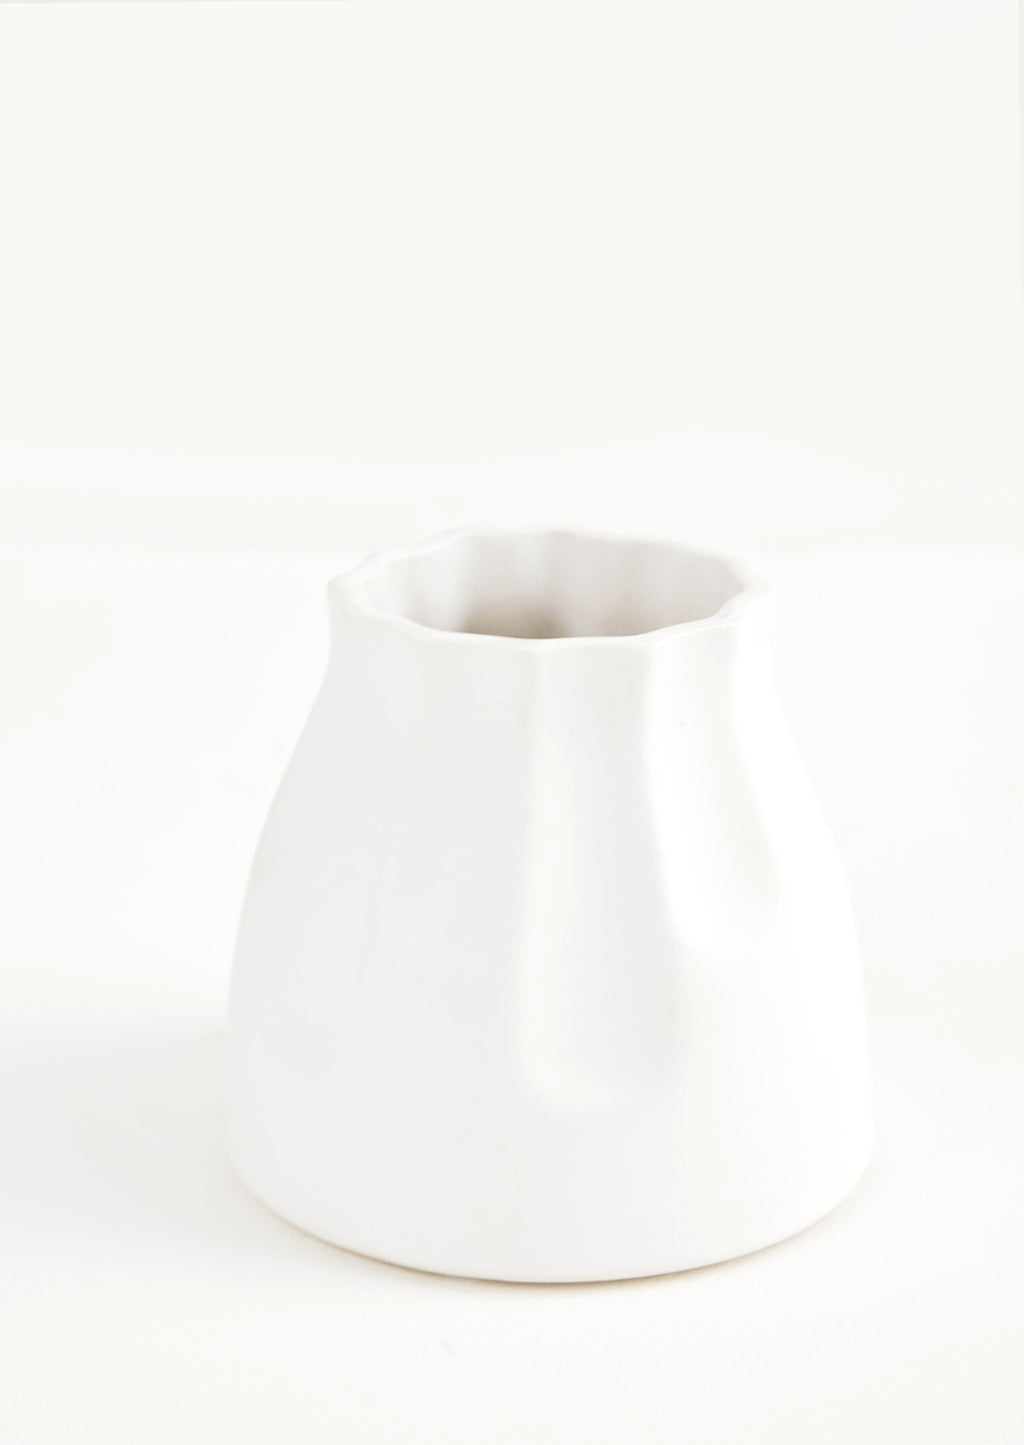 2: Small and round mini ceramic vase in white with fluting detailing along top